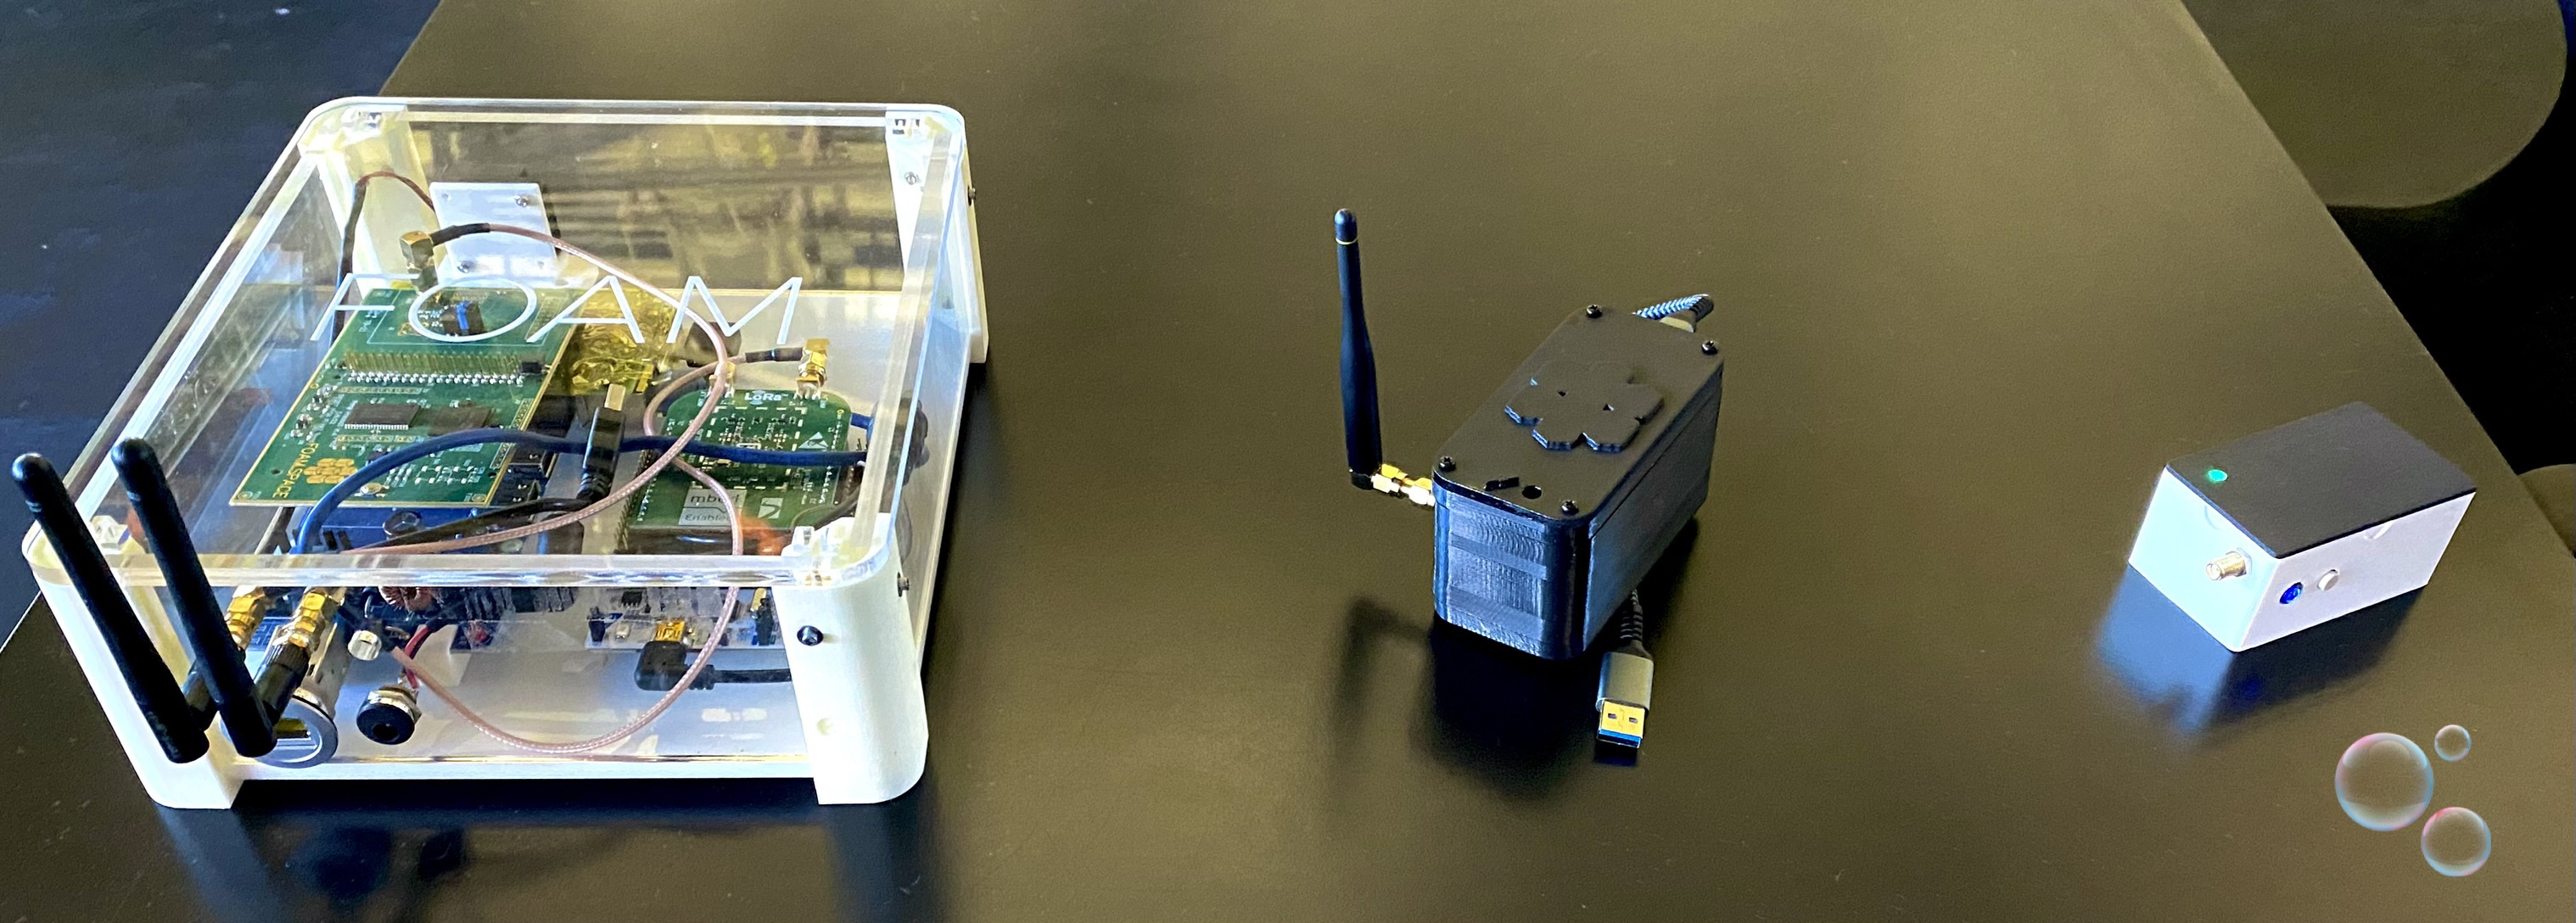 Evolution of FOAM “mobile node” radios from left to right. Previously used full Zone Anchor radio as mobile node, and now use miniature wireless node.